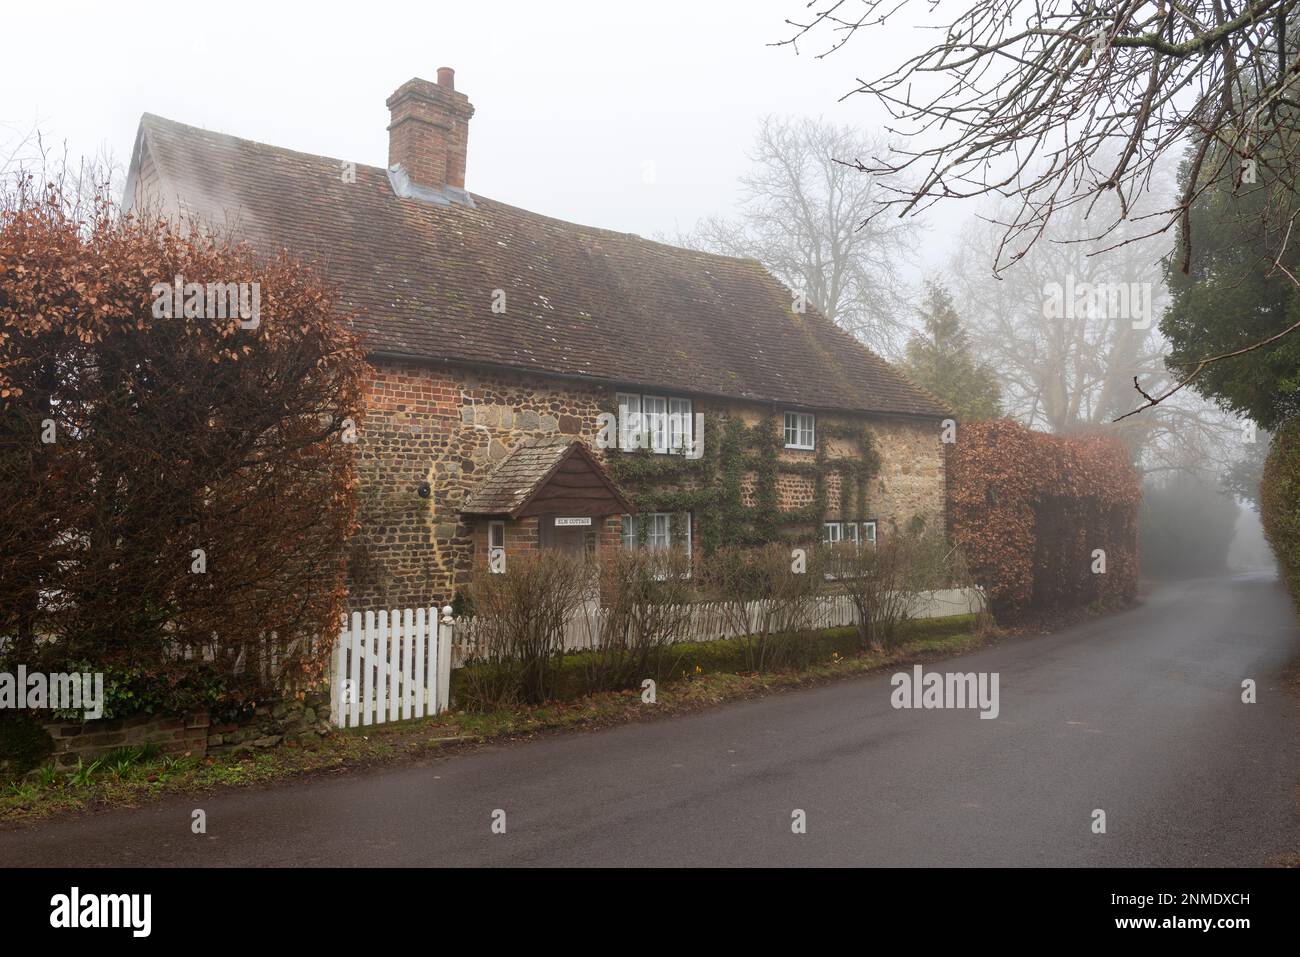 A brick and stone cottage in the village of Graffham on a foggy winter morning, West Sussex, England, Uk Stock Photo